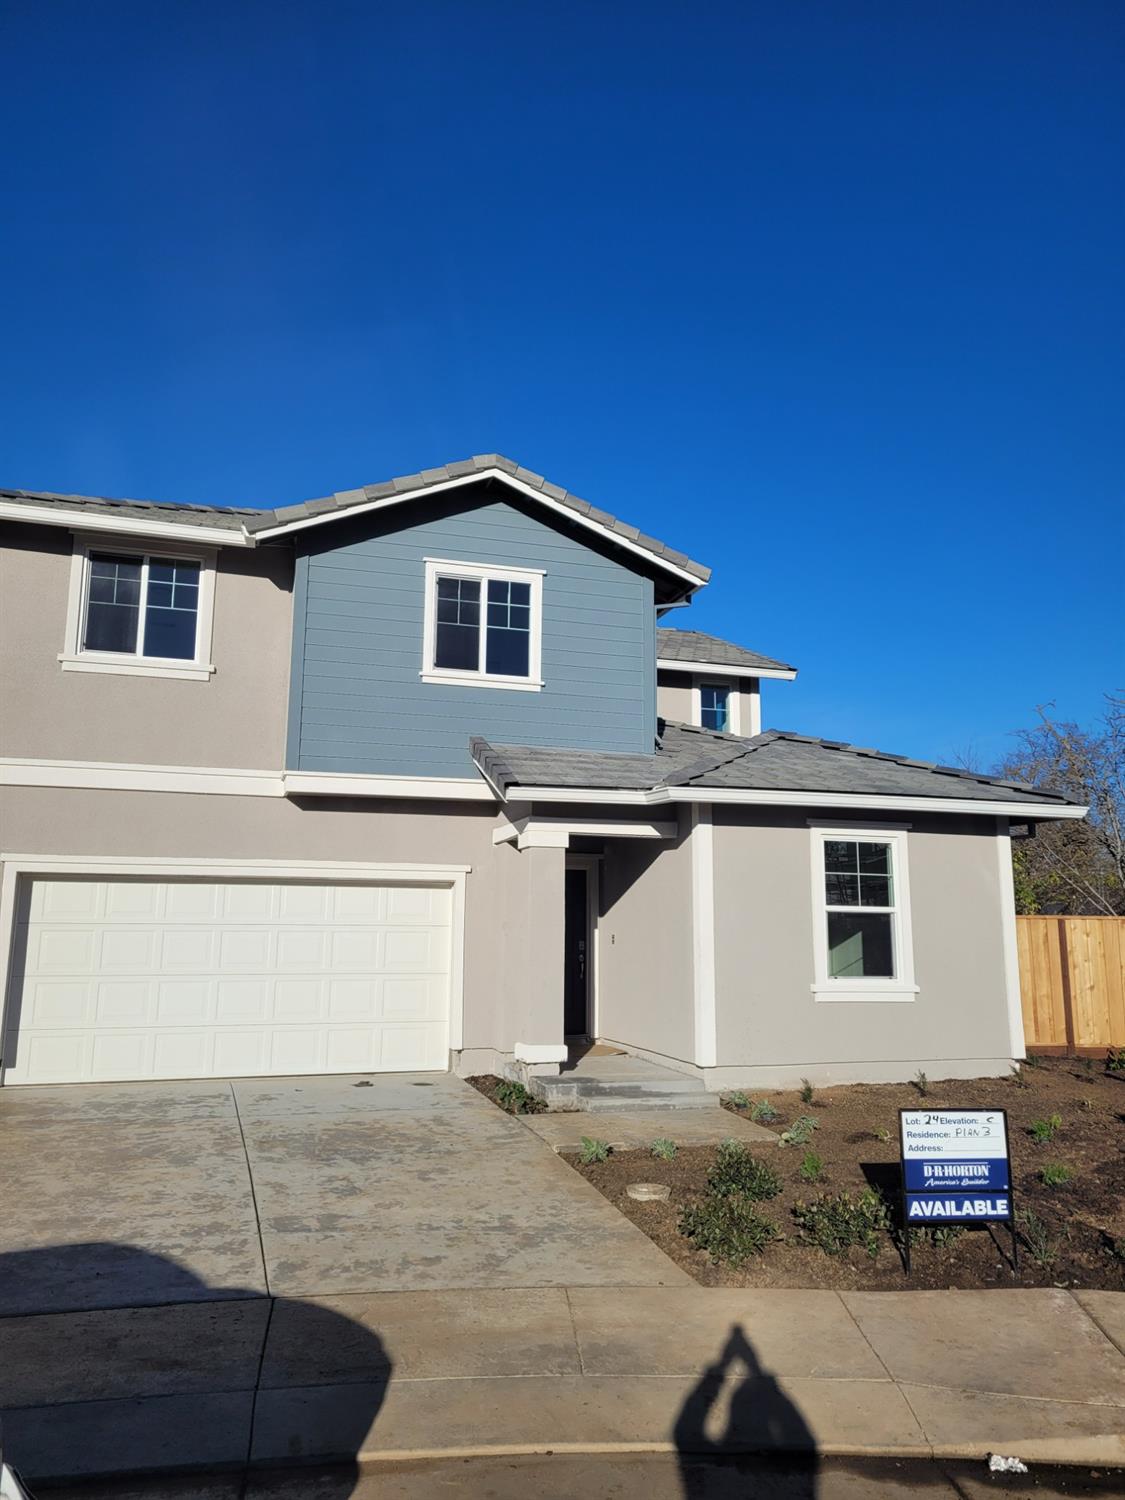 Photo of 9165 Whickham Ct in Gilroy, CA